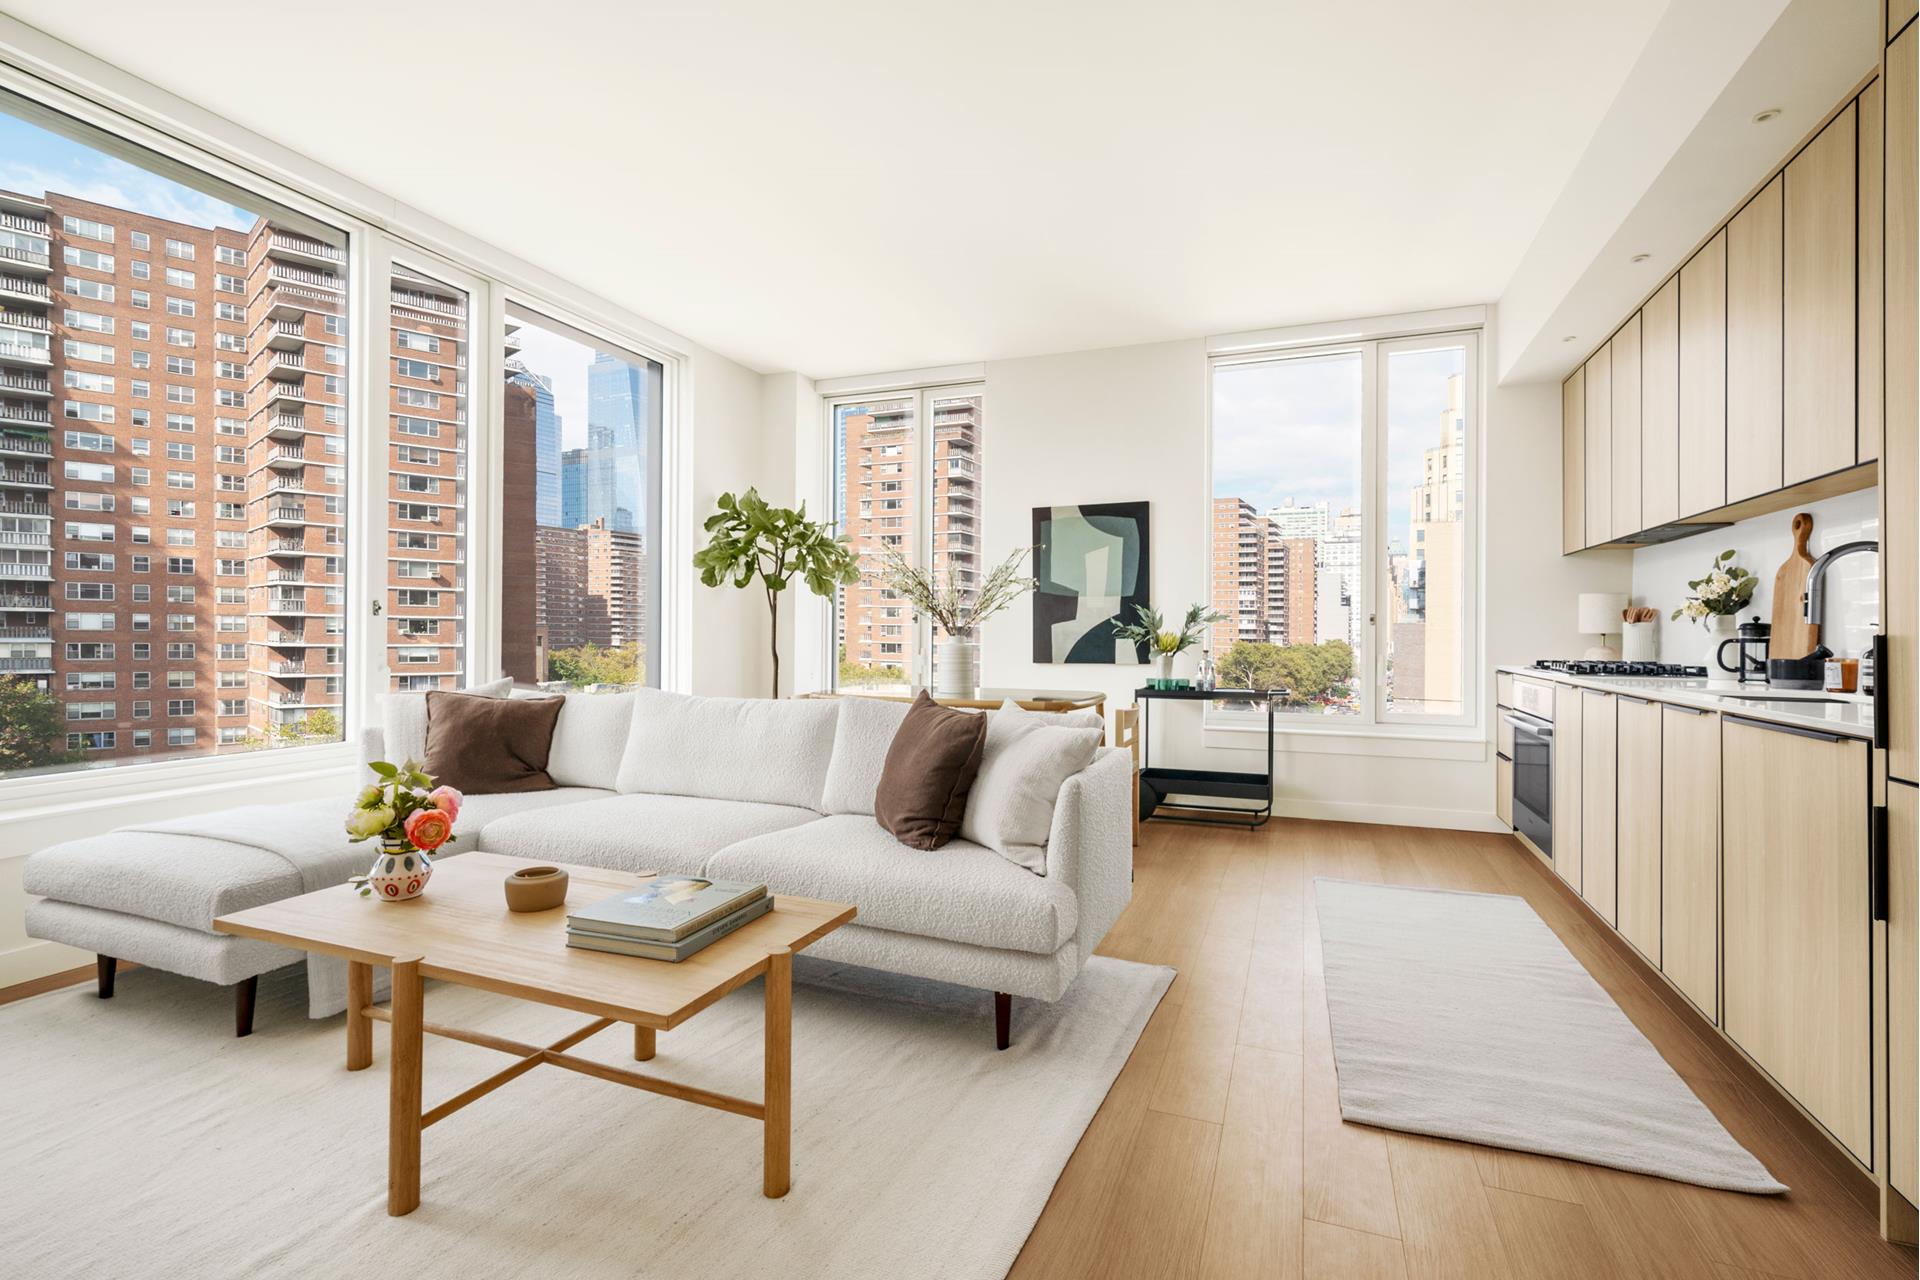 280 West 24th Street Ph1g, Chelsea, Downtown, NYC - 2 Bedrooms  
2.5 Bathrooms  
3 Rooms - 